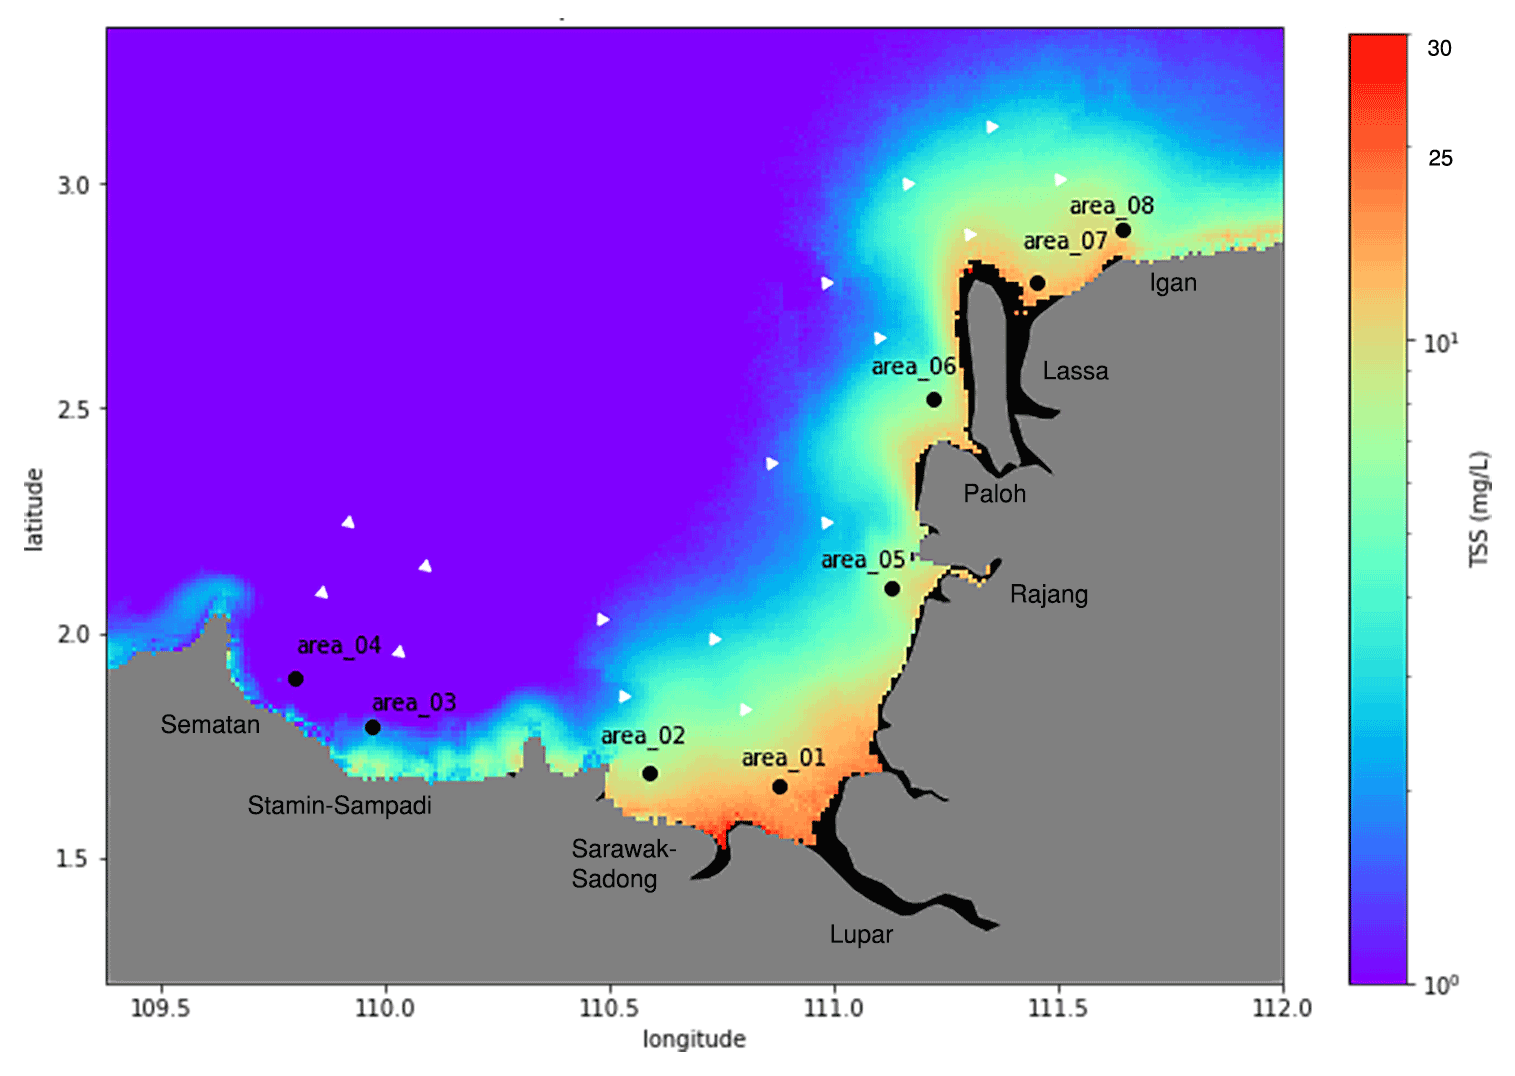 BG - Spatial and temporal dynamics of suspended sediment concentrations in  coastal waters of the South China Sea, off Sarawak, Borneo: ocean colour  remote sensing observations and analysis